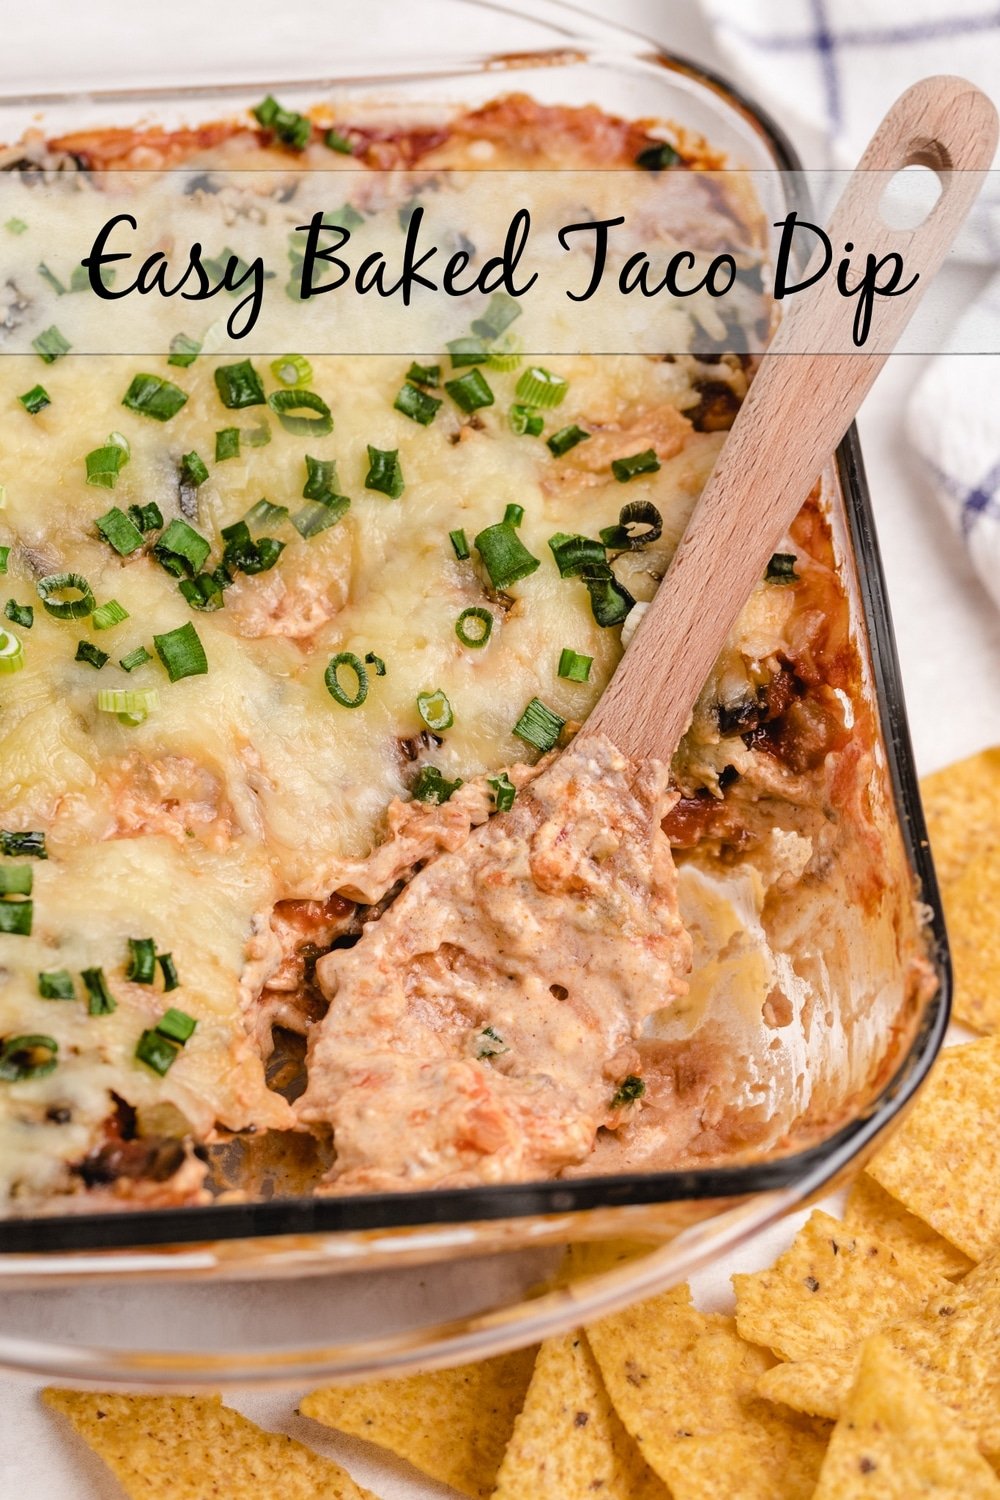 Taco Dip at its most pure and basic form. With ten ingredients - there's plenty of room for customization (swap in - swap out). Overall, this dip is a minimum effort, maximum impact recipe.  via @cmpollak1